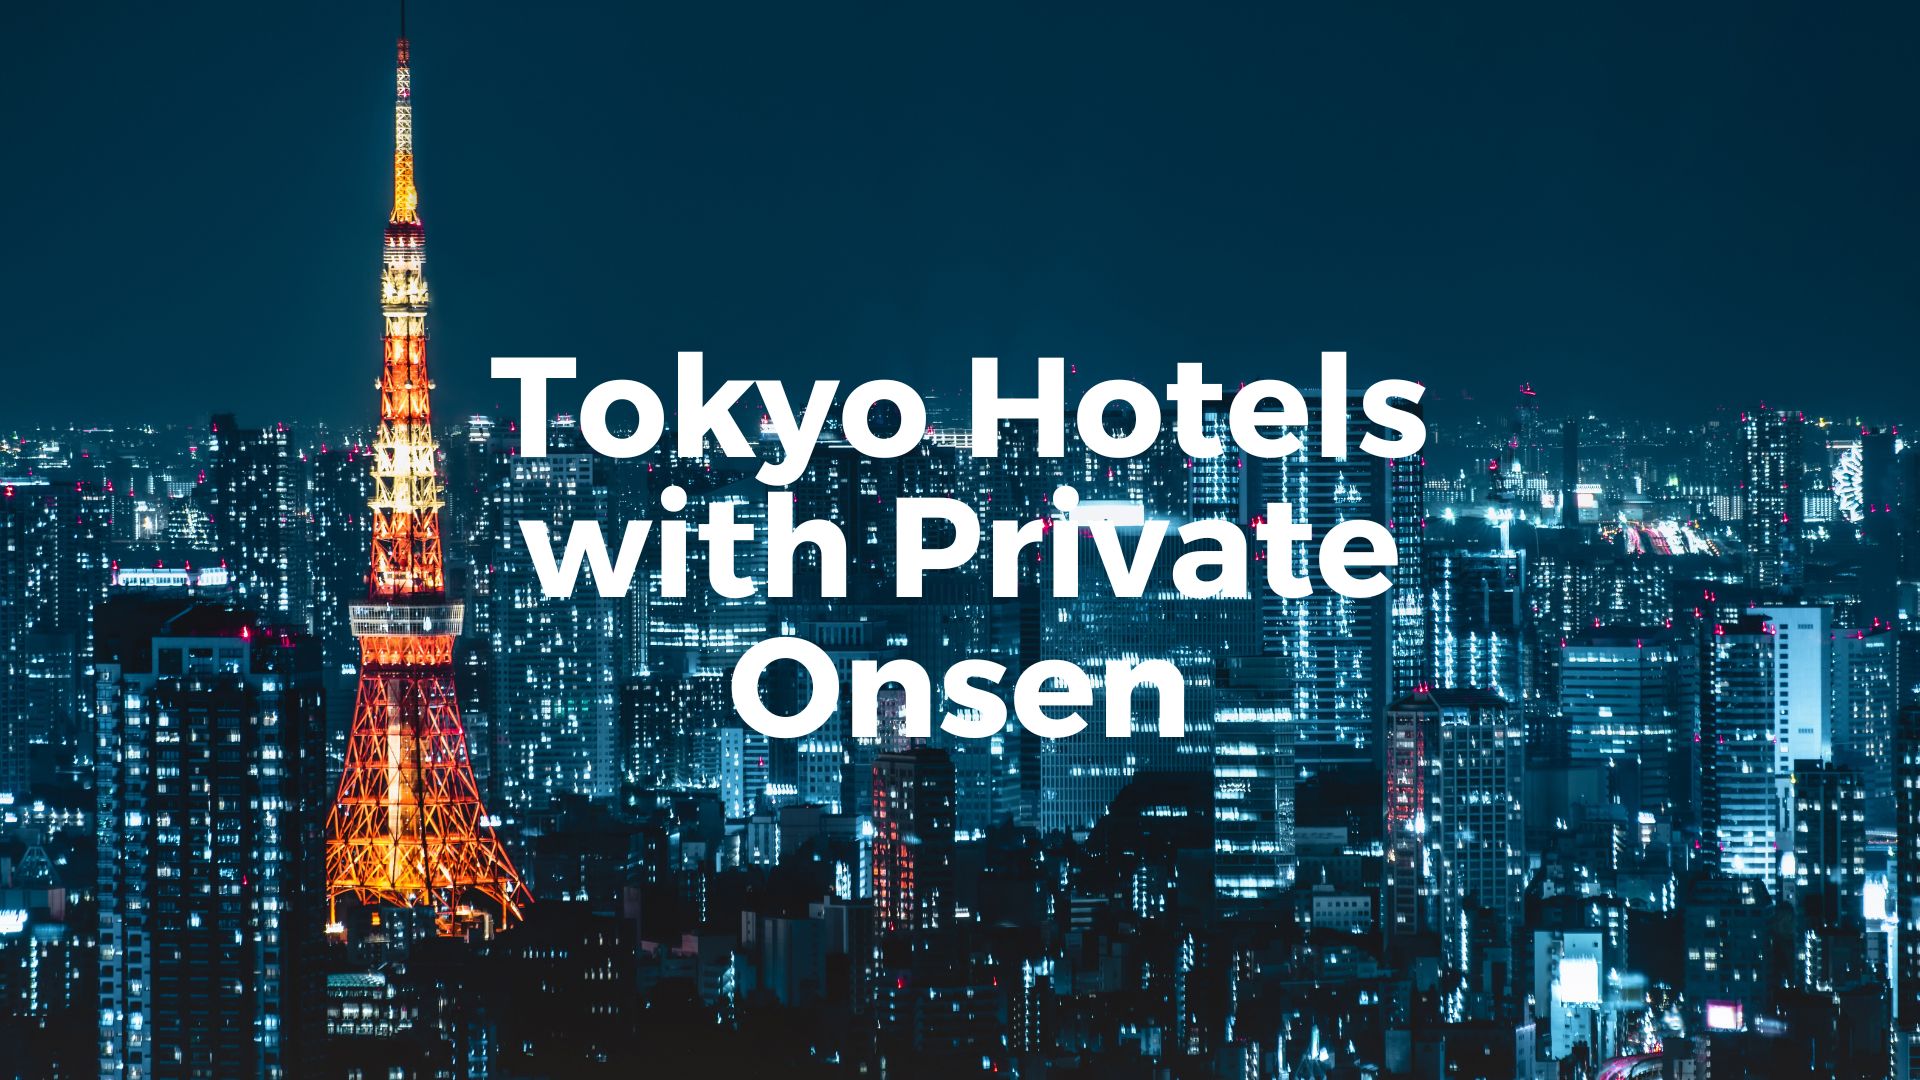 Tokyo ryokan with private onsen, private onsen Tokyo, hotels in Tokyo with private onsen, Tokyo hotels with en-suite private onsen, Tokyo ryokan with attached private onsen